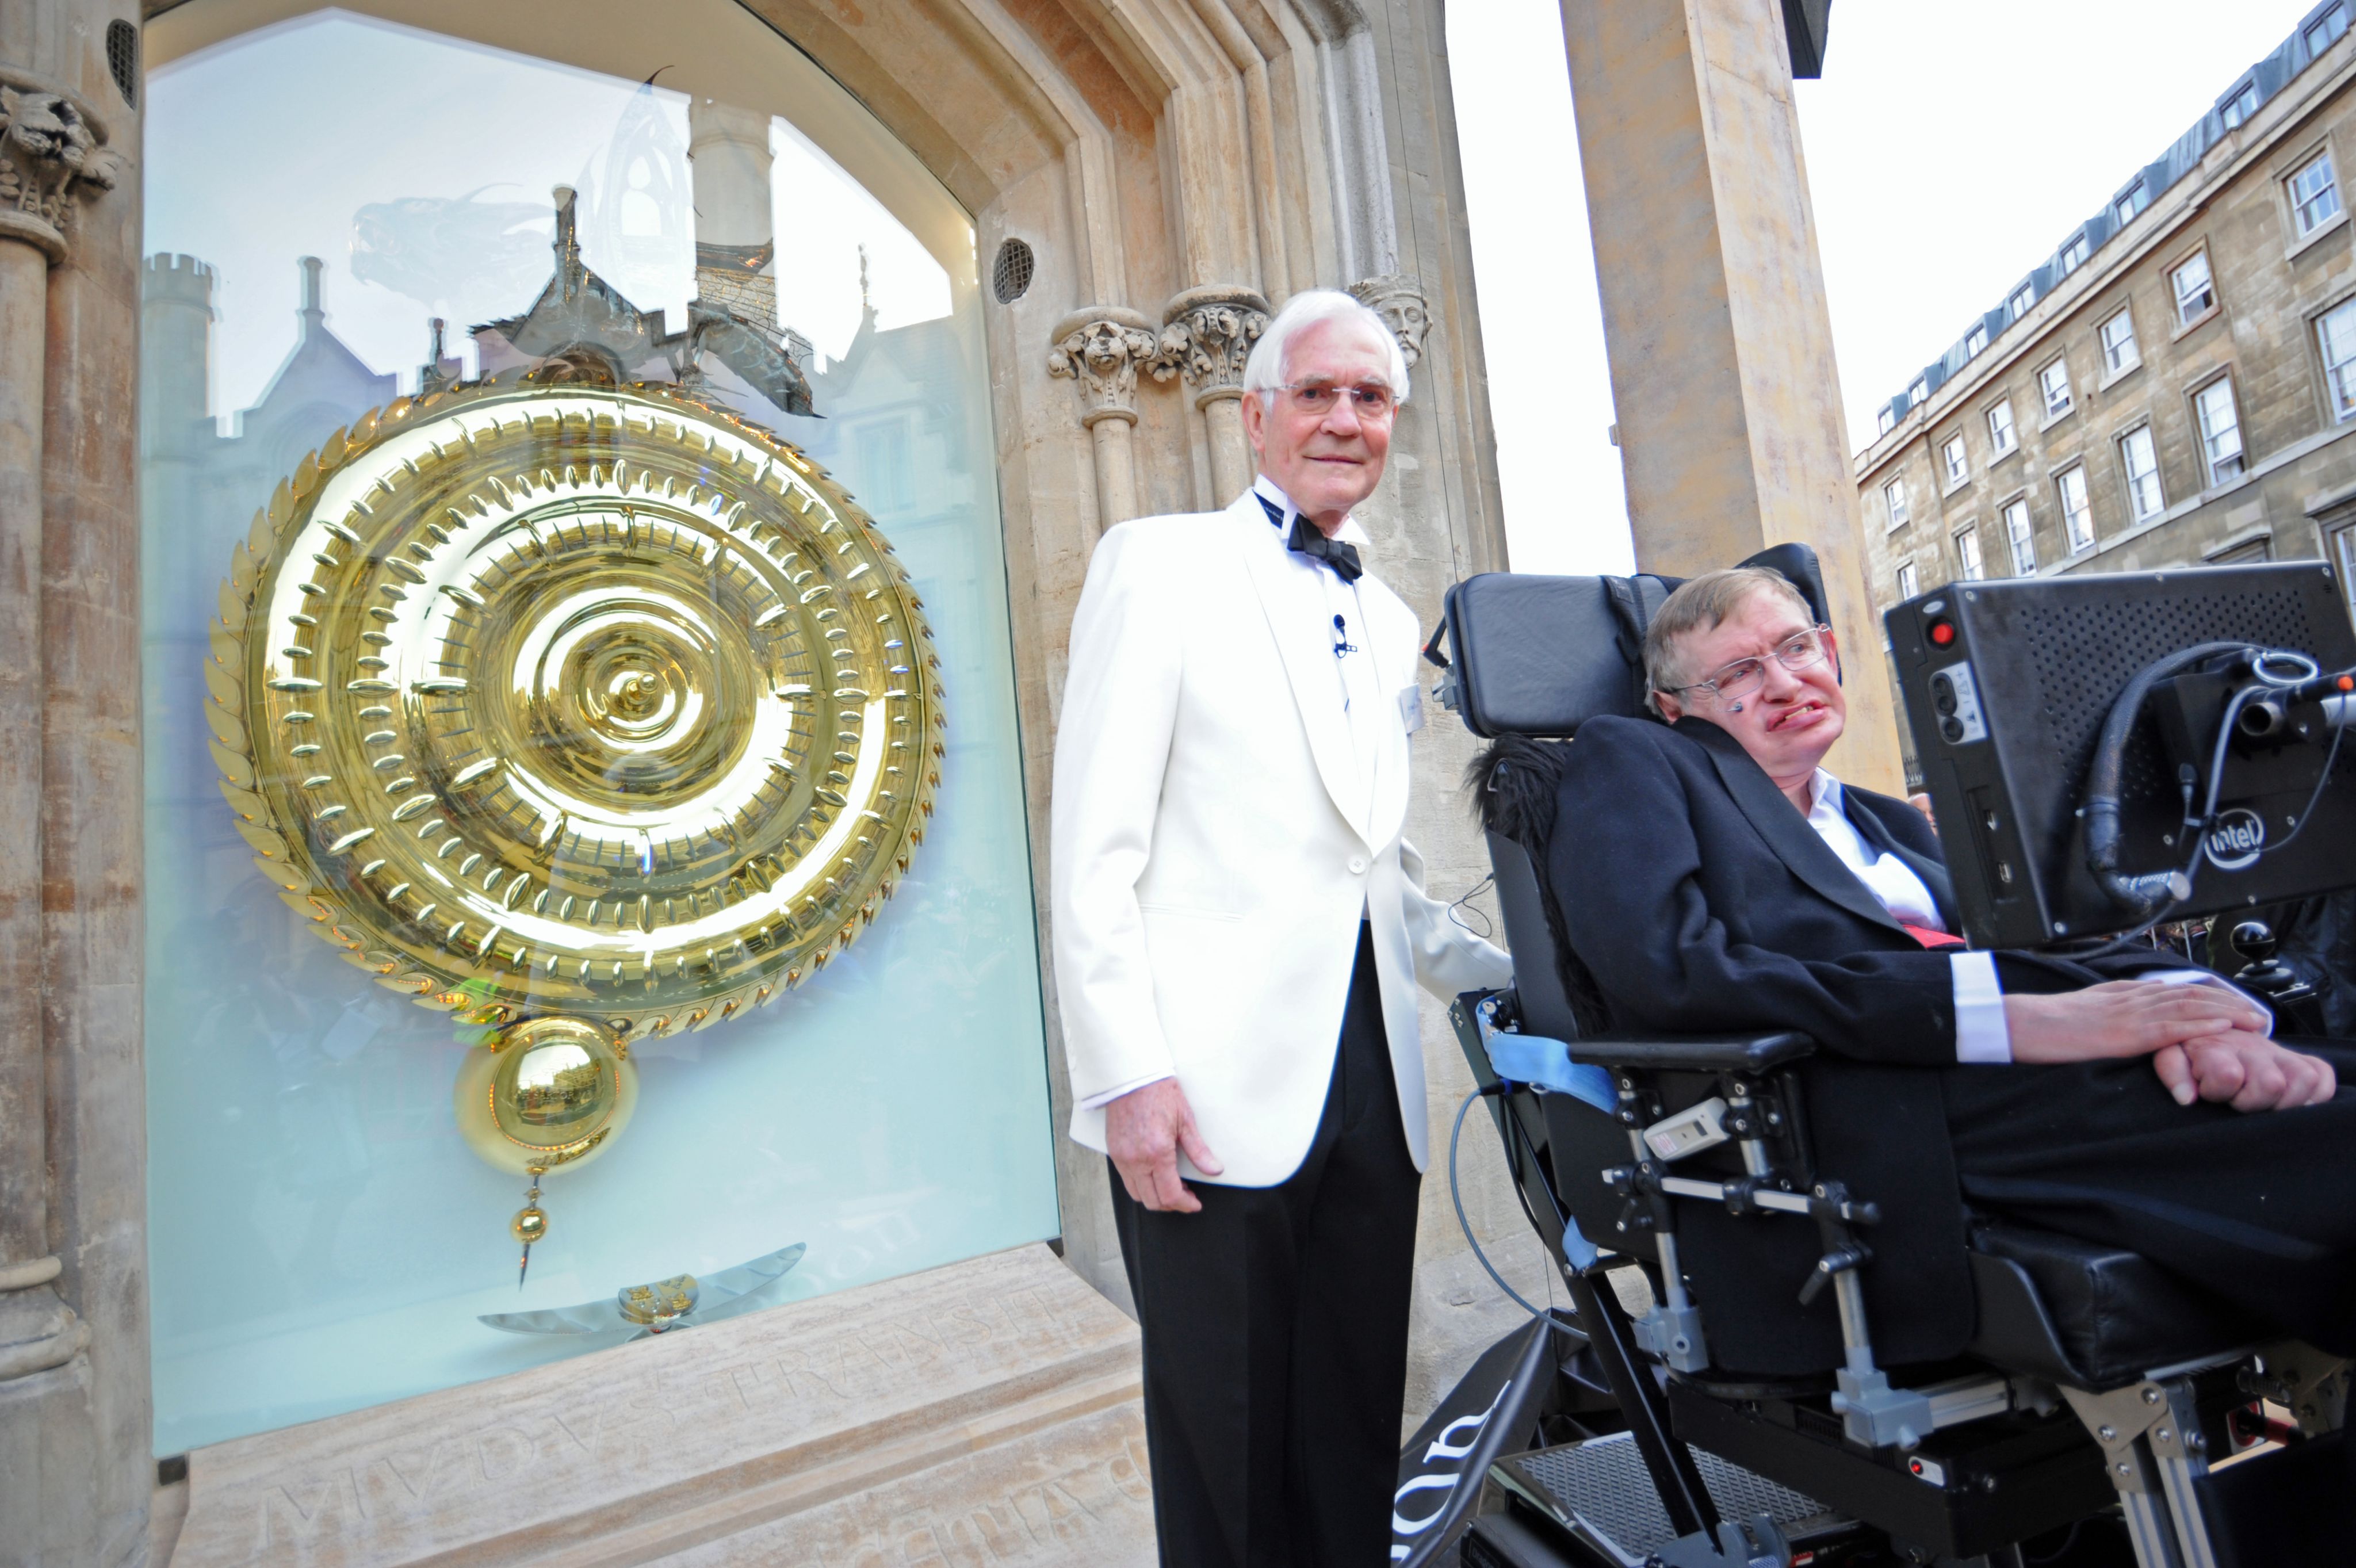 Dr John C Taylor OBE with Professor Stephen Hawking at the opening of the Corpus Chronophage on 19 September 2008.